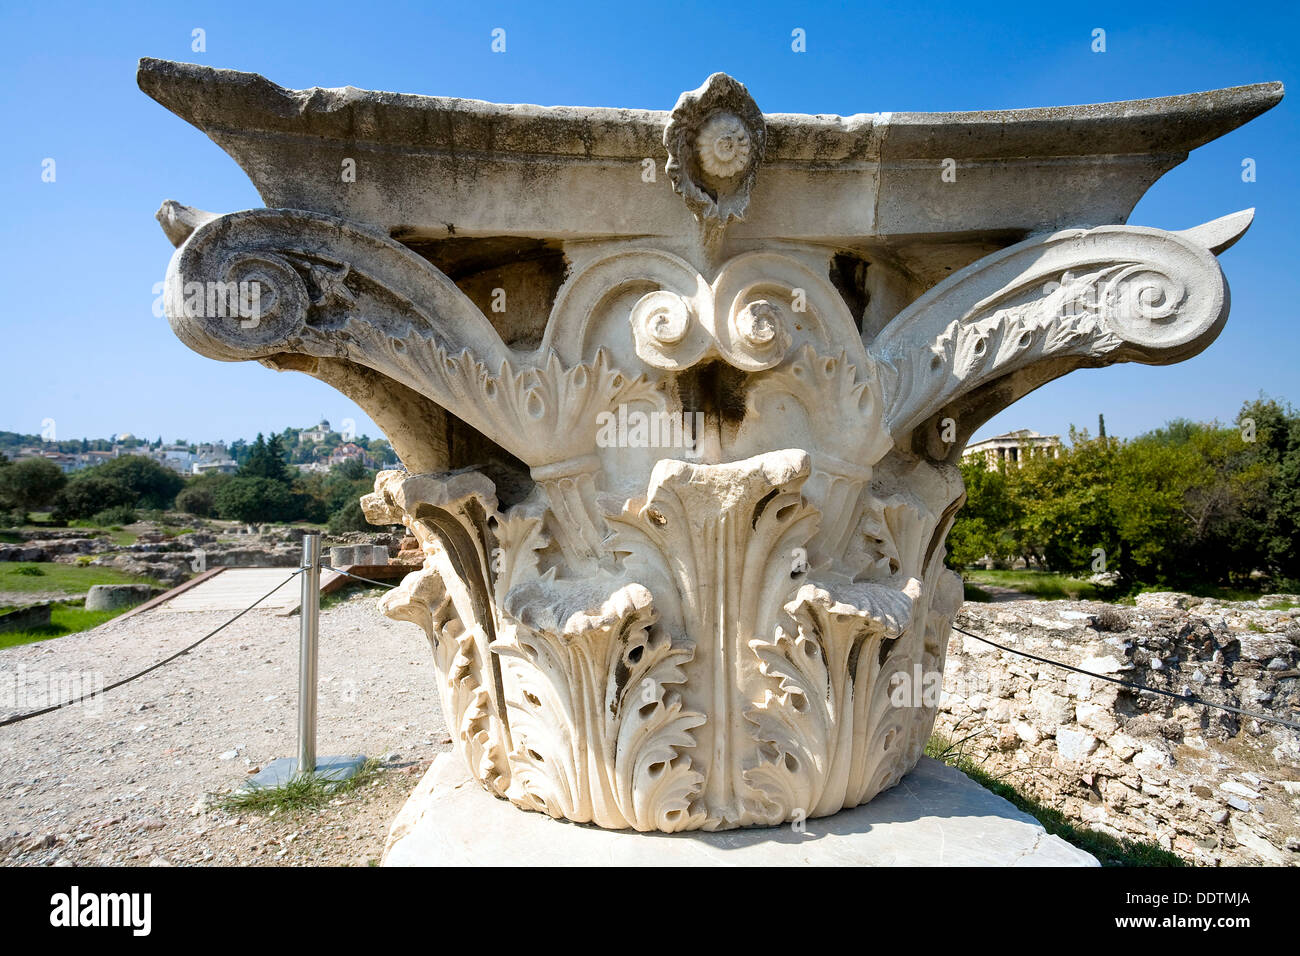 A capital in the Greek Agora of Athens, Greece. Artist: Samuel Magal Stock Photo